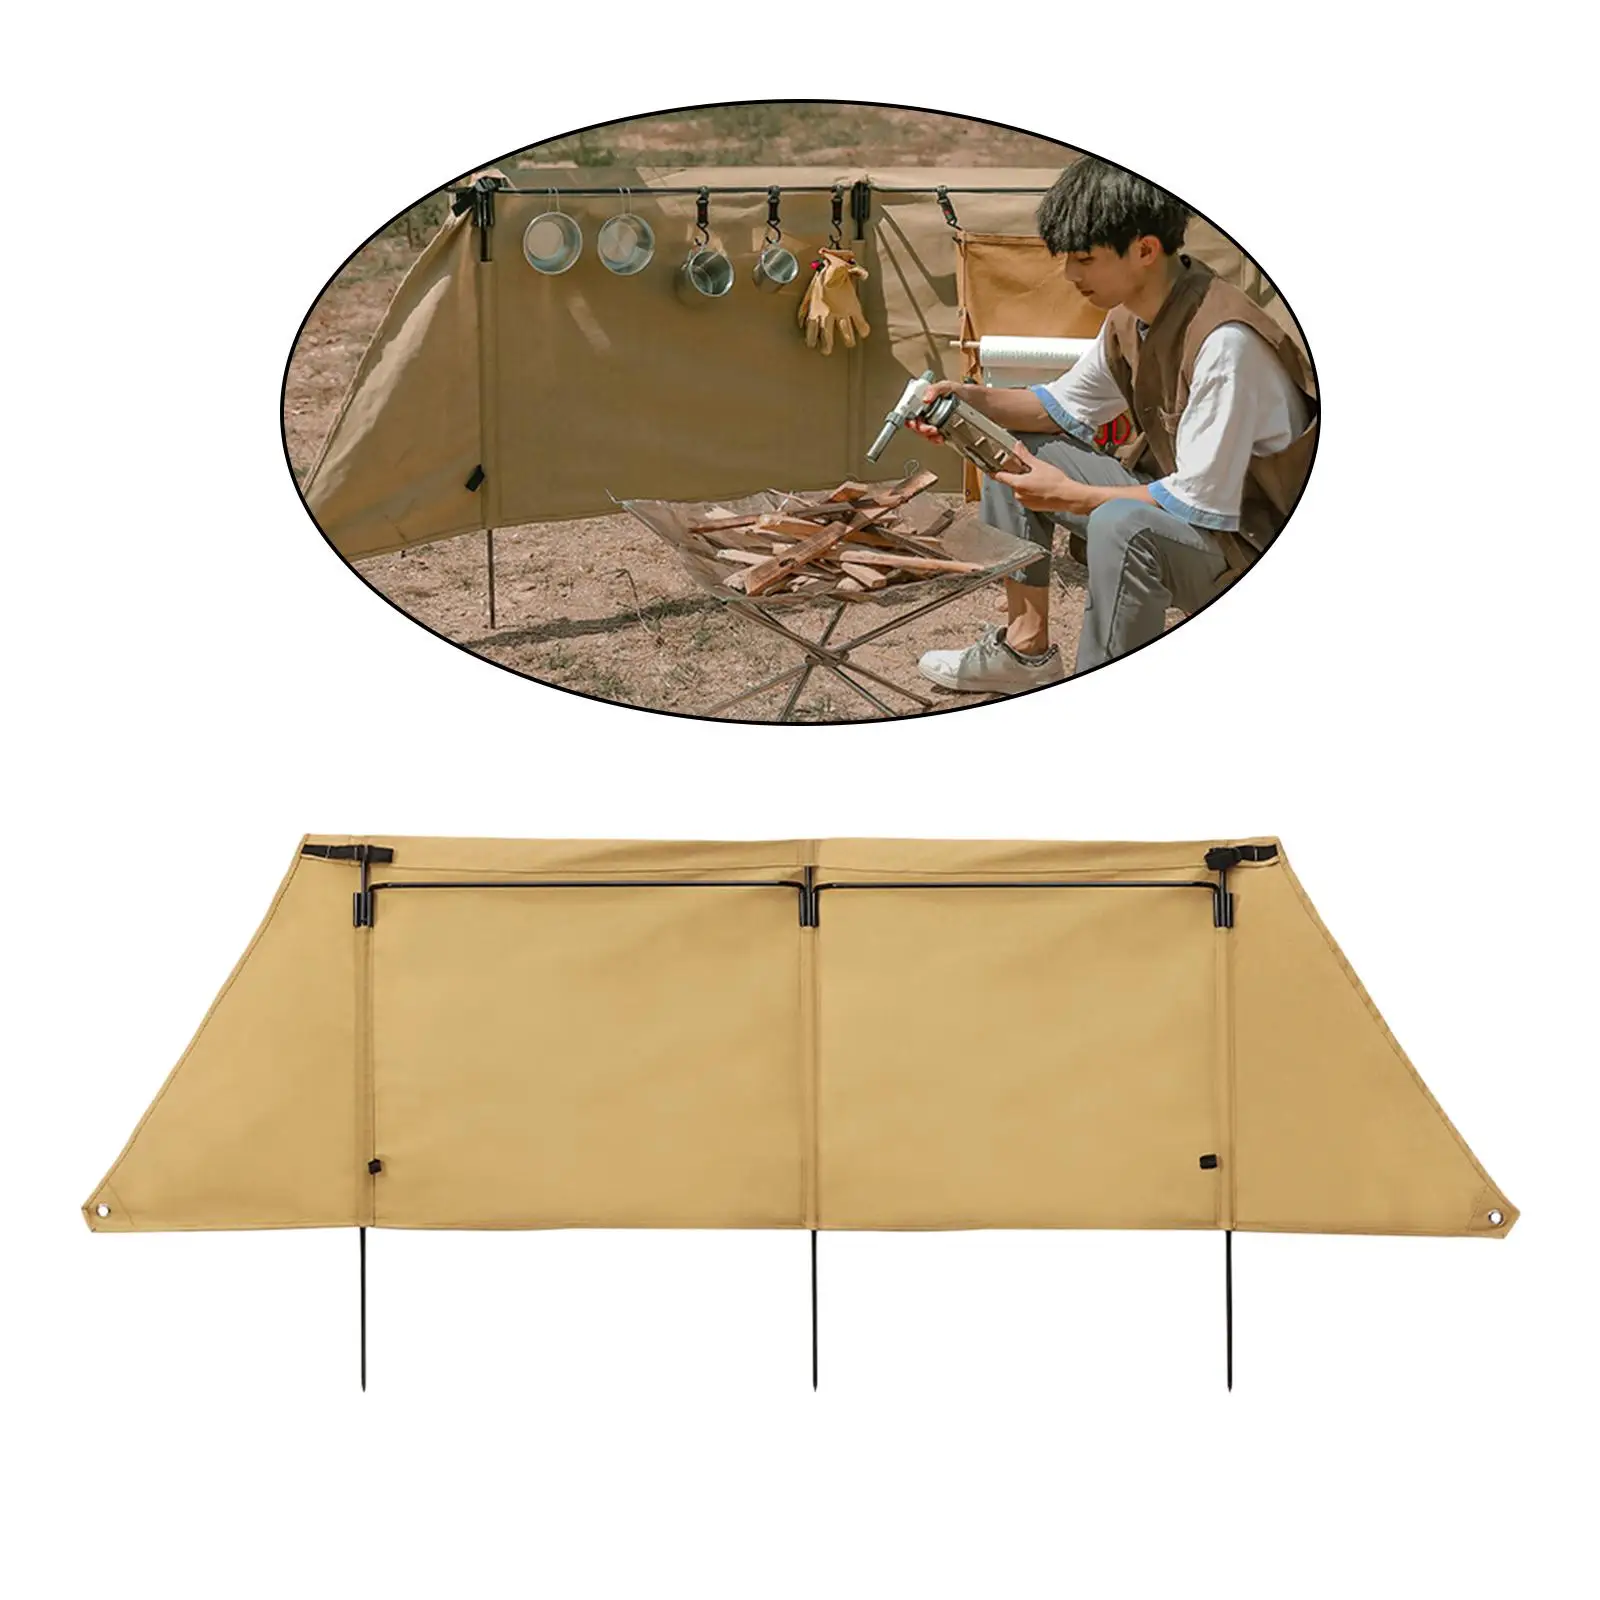 Portable Camping Wind Shield Stand Fireproof Cooking Grills Stove Canvas Windscreen Curtain Hiking Picnic Barbecue Windshield